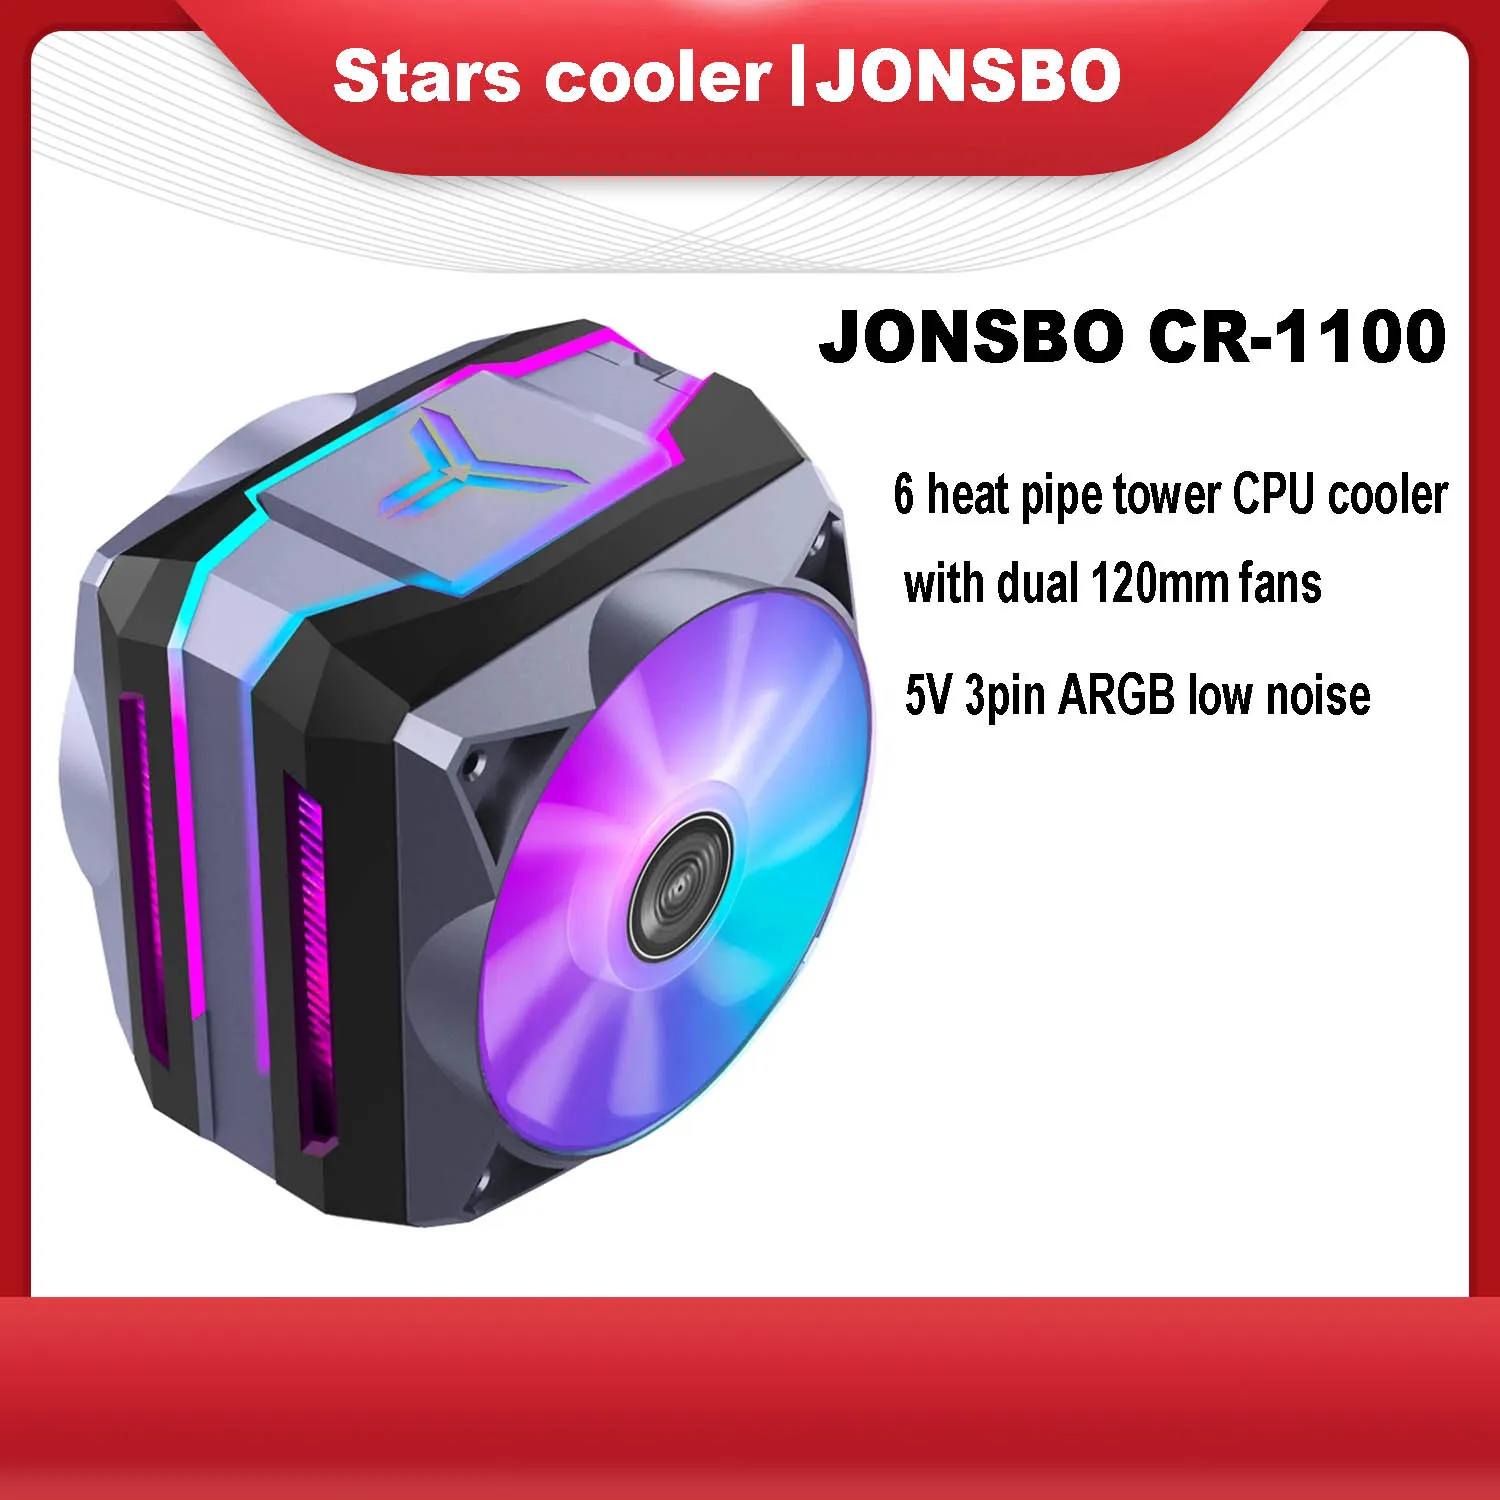 JONSBO CR-1100 5V 3pin ARGB/6 heat pipe tower CPU cooler/with dual 12cm fans/CPU cooling for Intel 775 115X AMD AM4